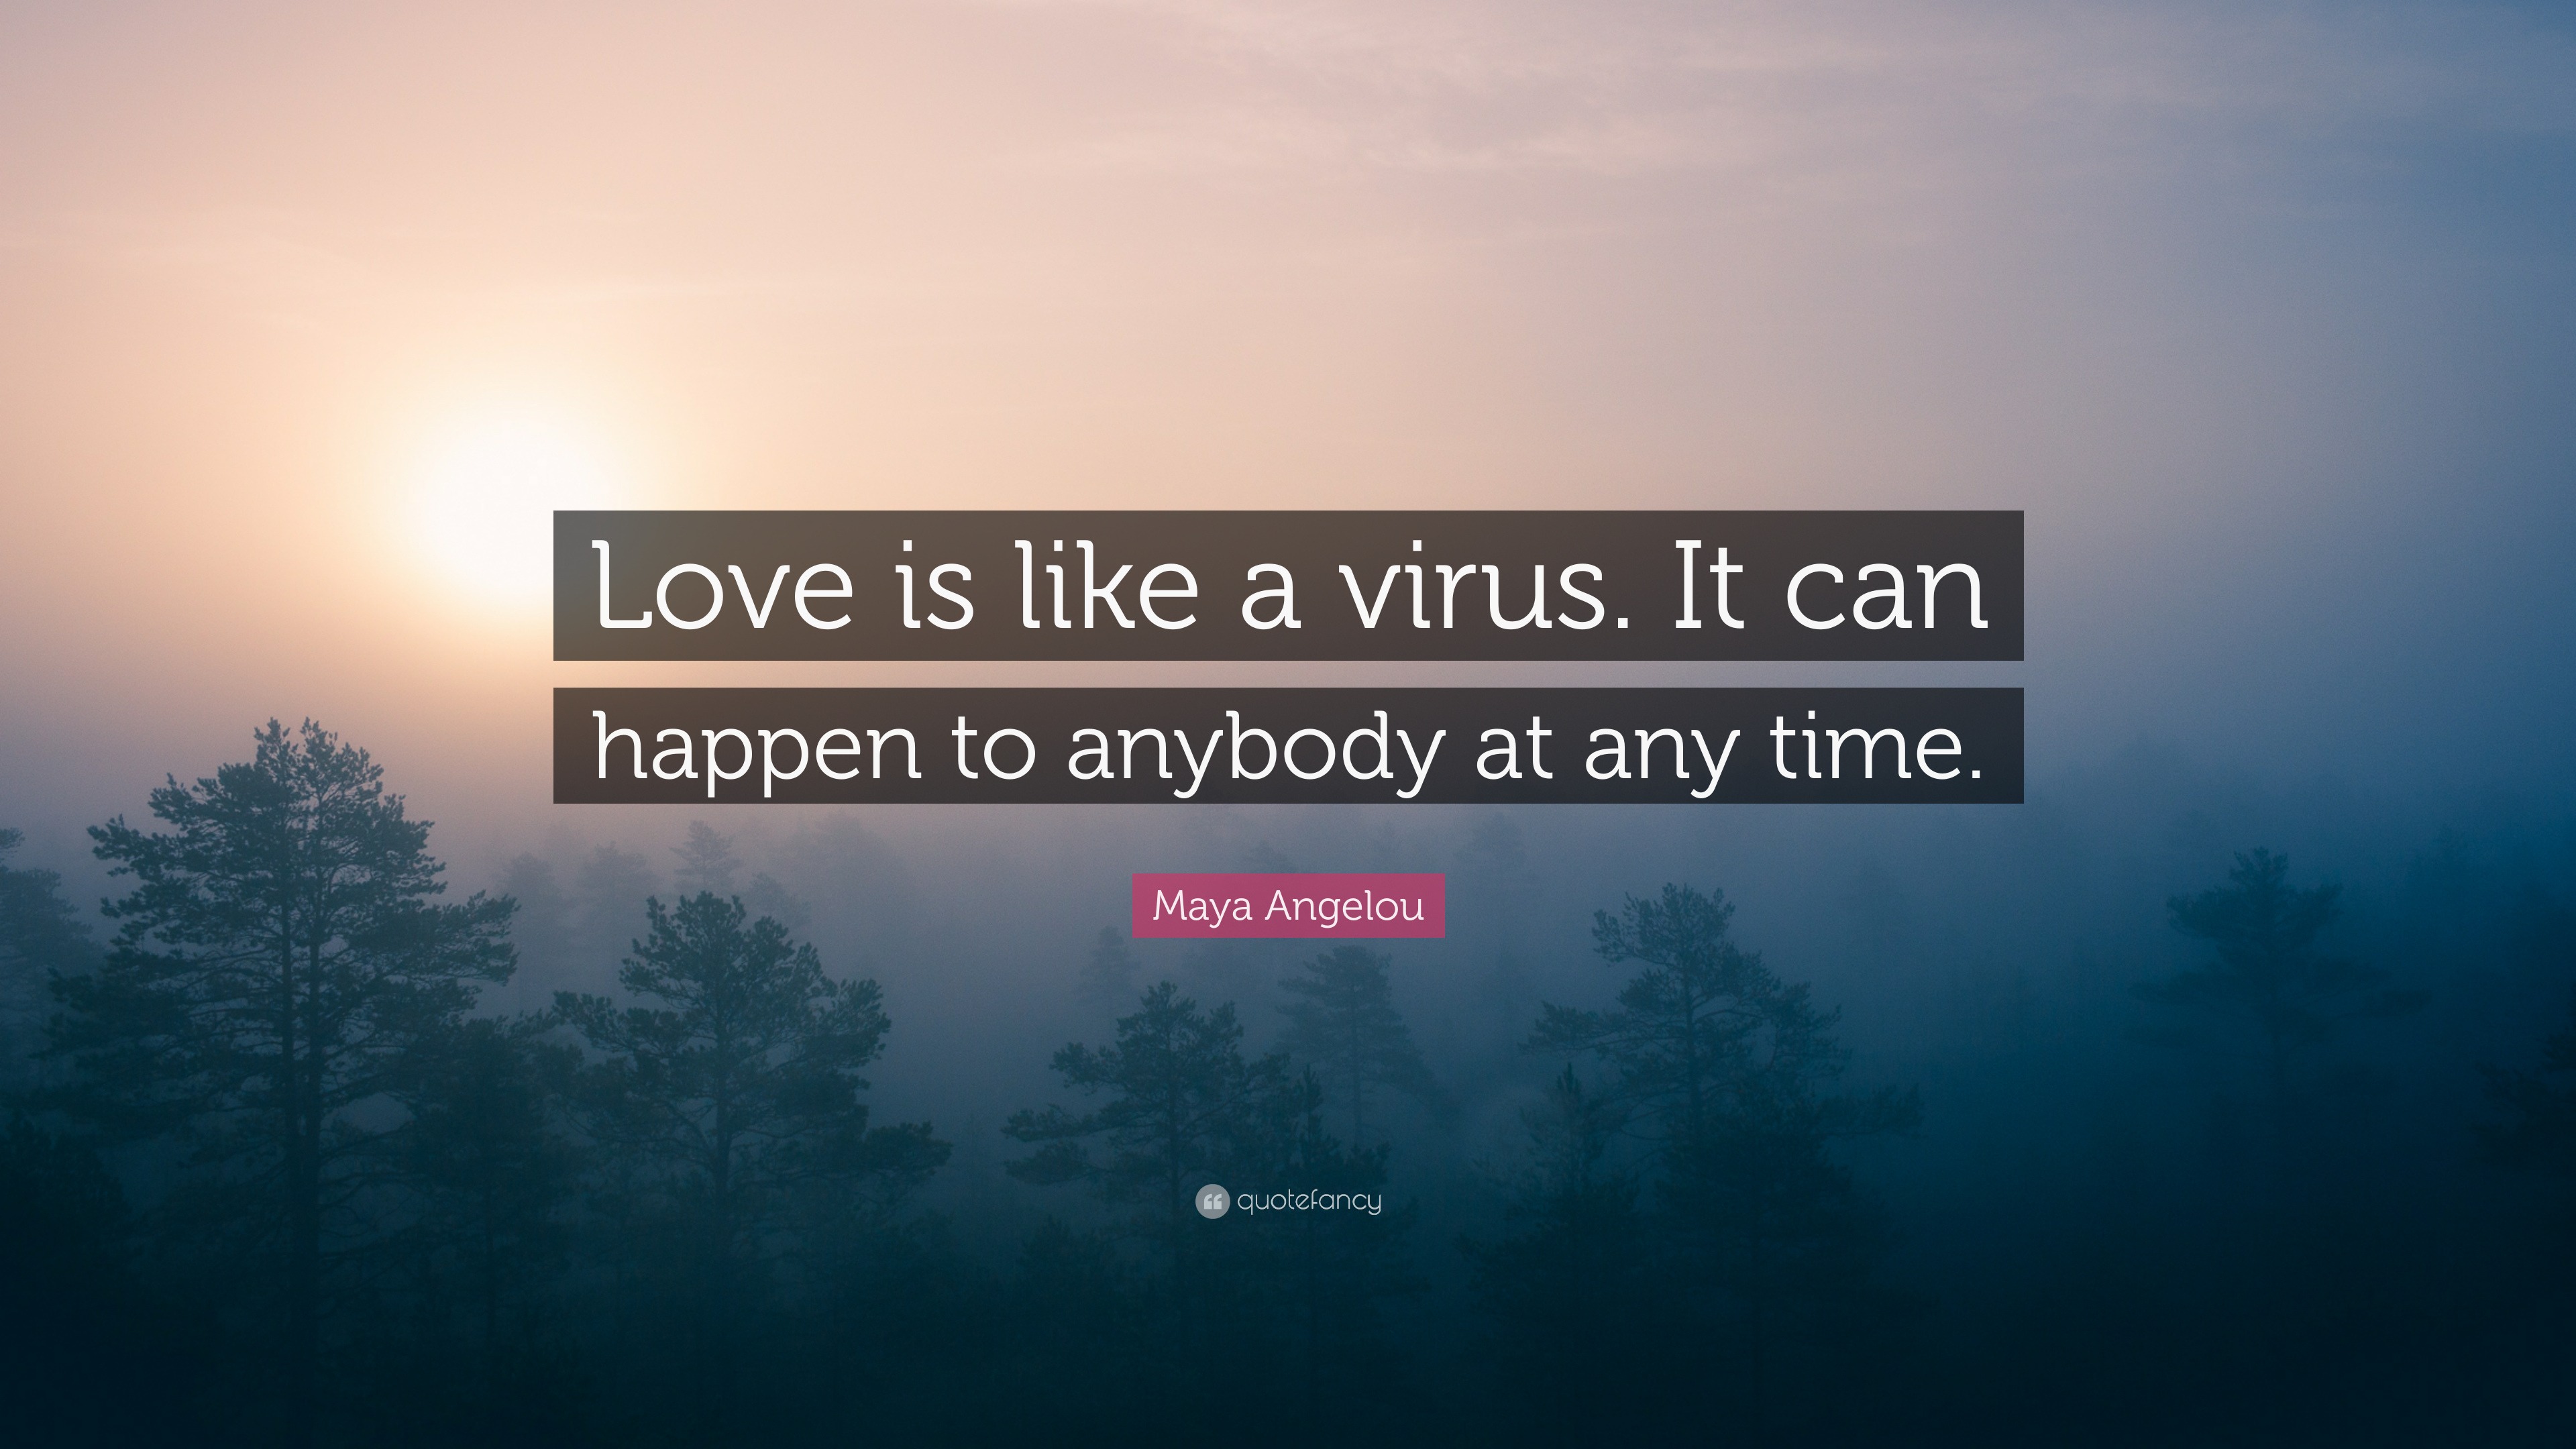 Maya Angelou Quote “Love is like a virus It can happen to anybody